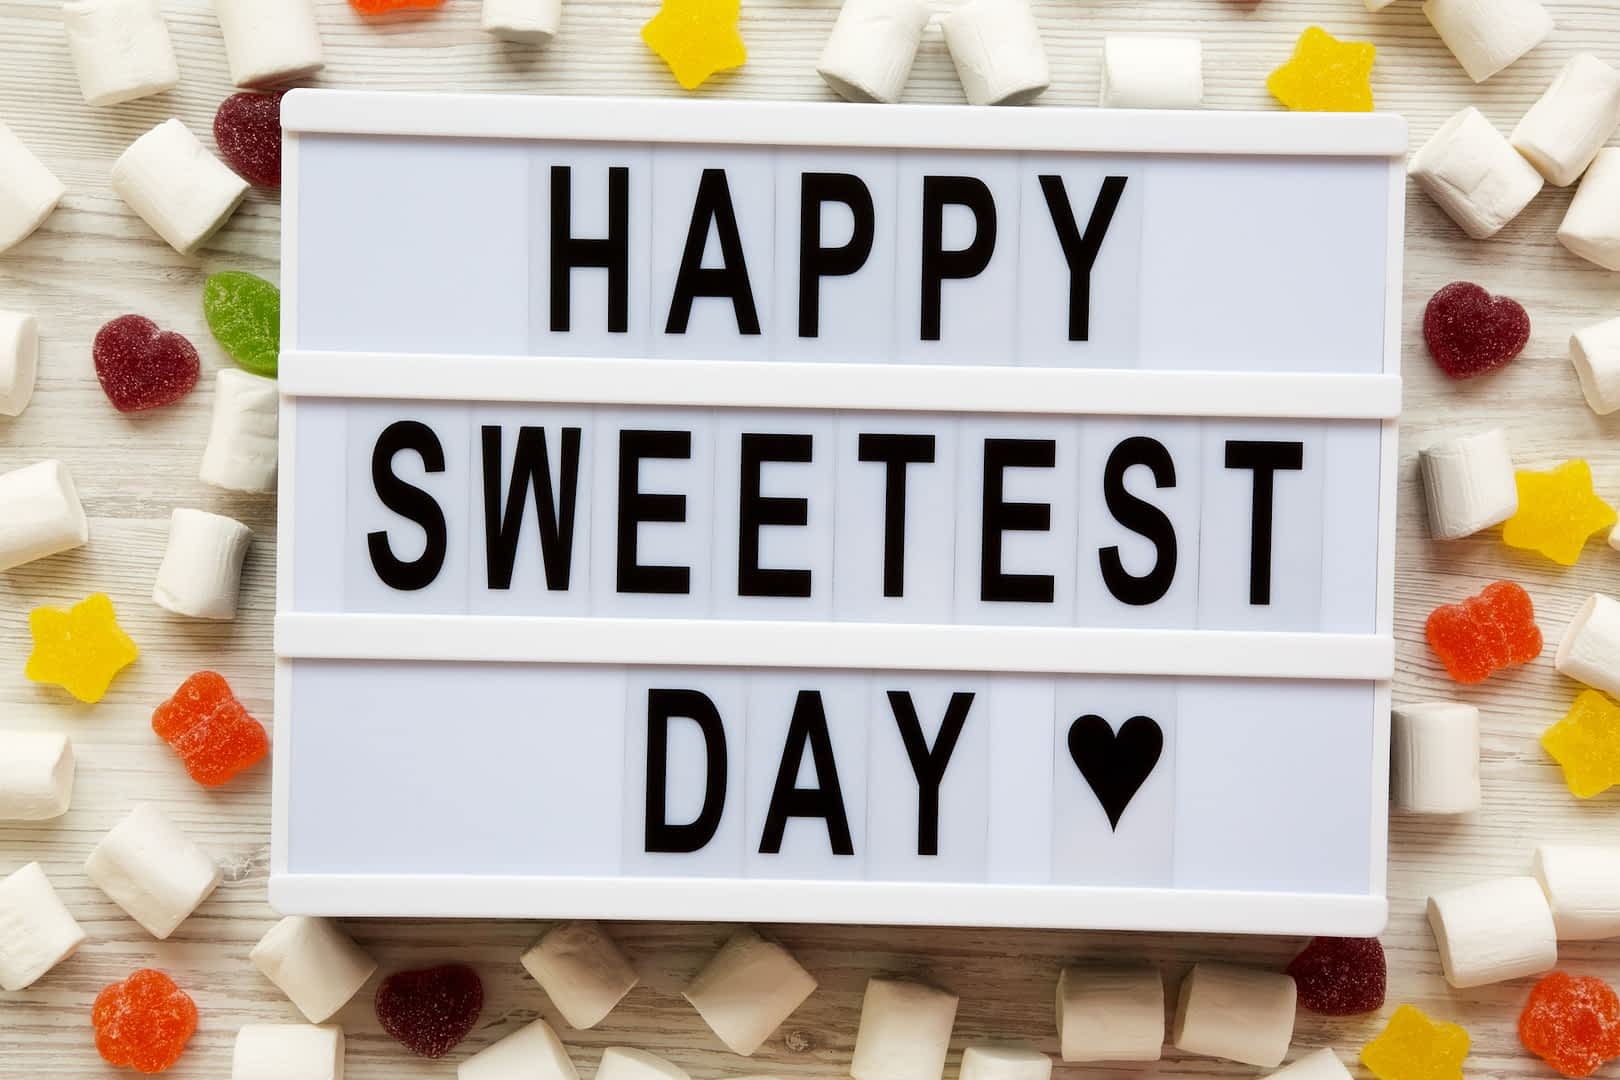 Modern board with text 'Happy Sweetest Day' word and candy